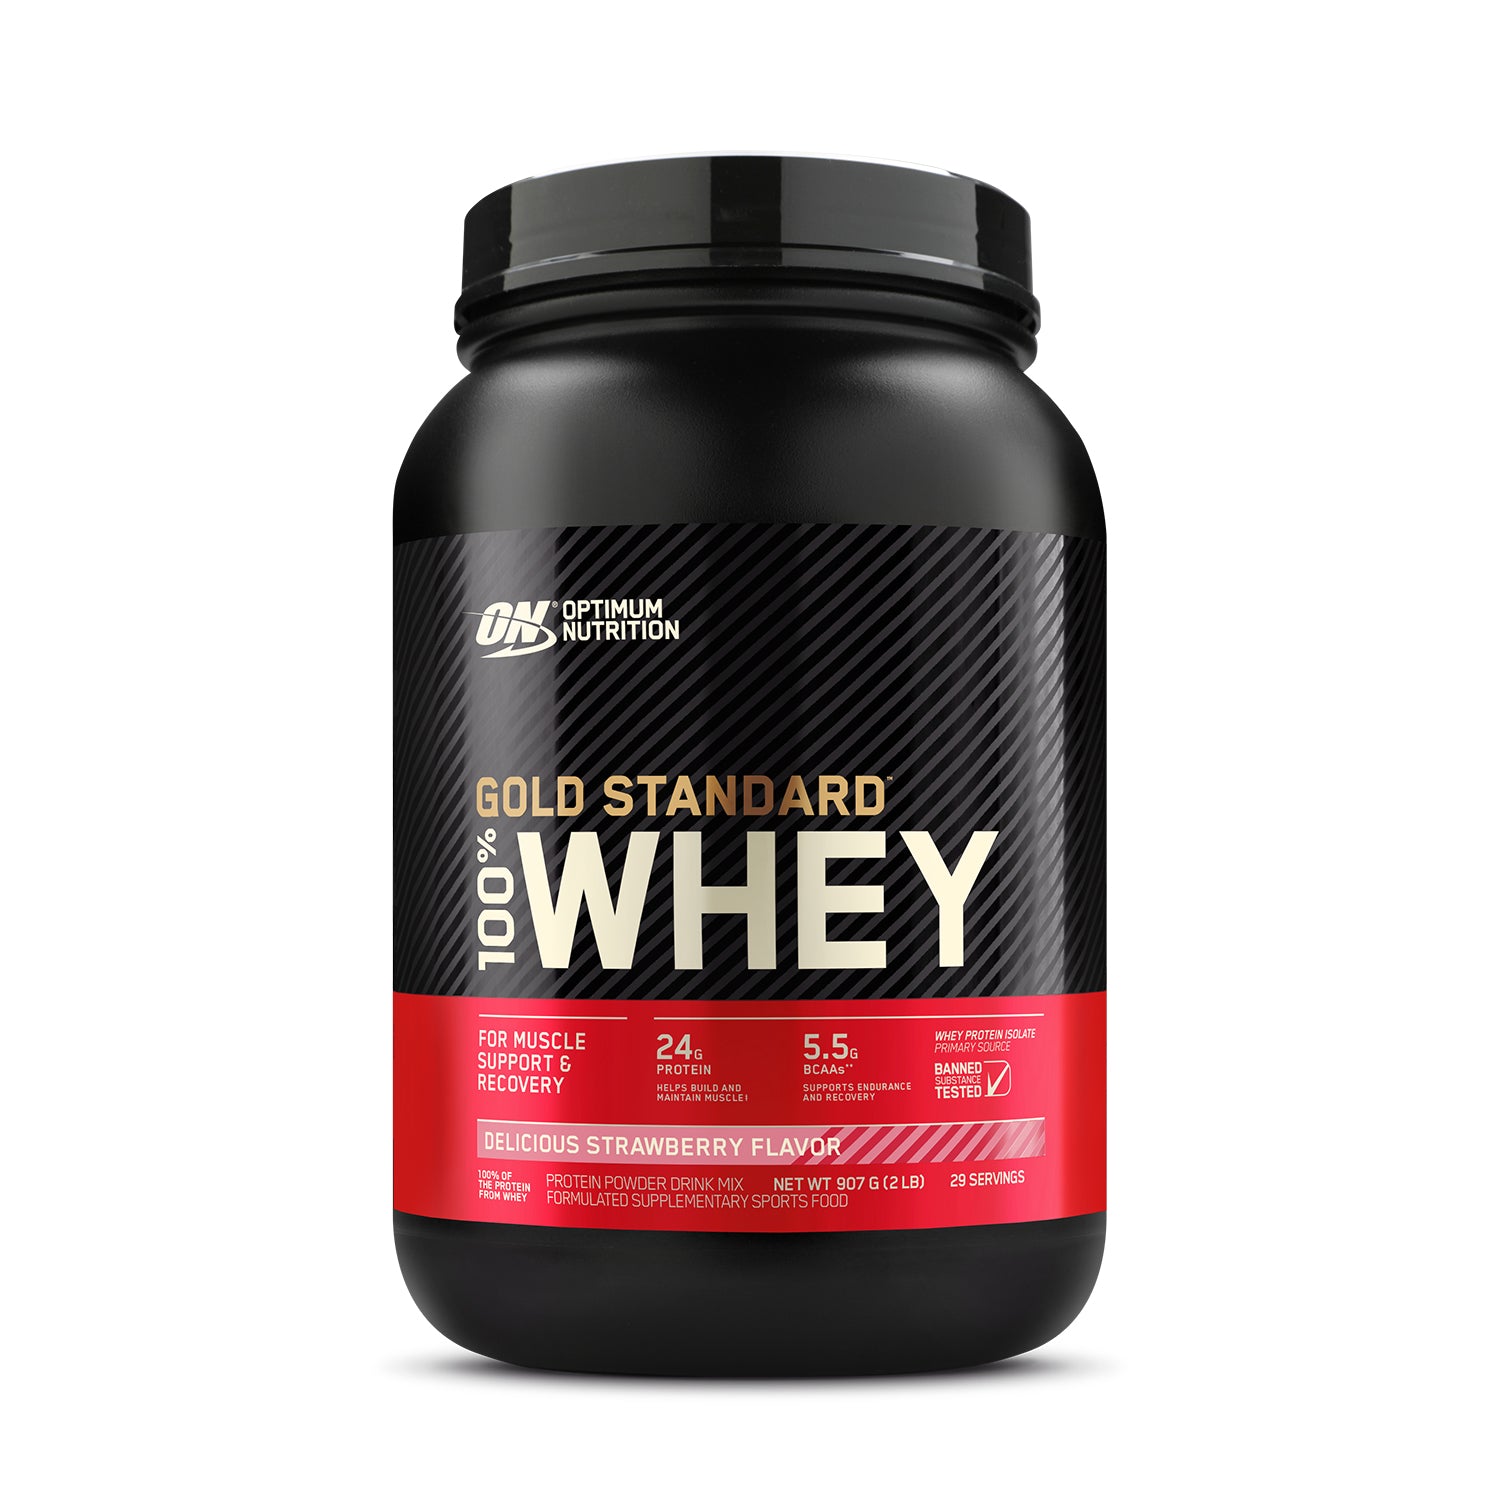 Gold Standard 100 Whey Protein Powder - Delicious Strawberry 907 Grams (2 lbs) 29 Servings